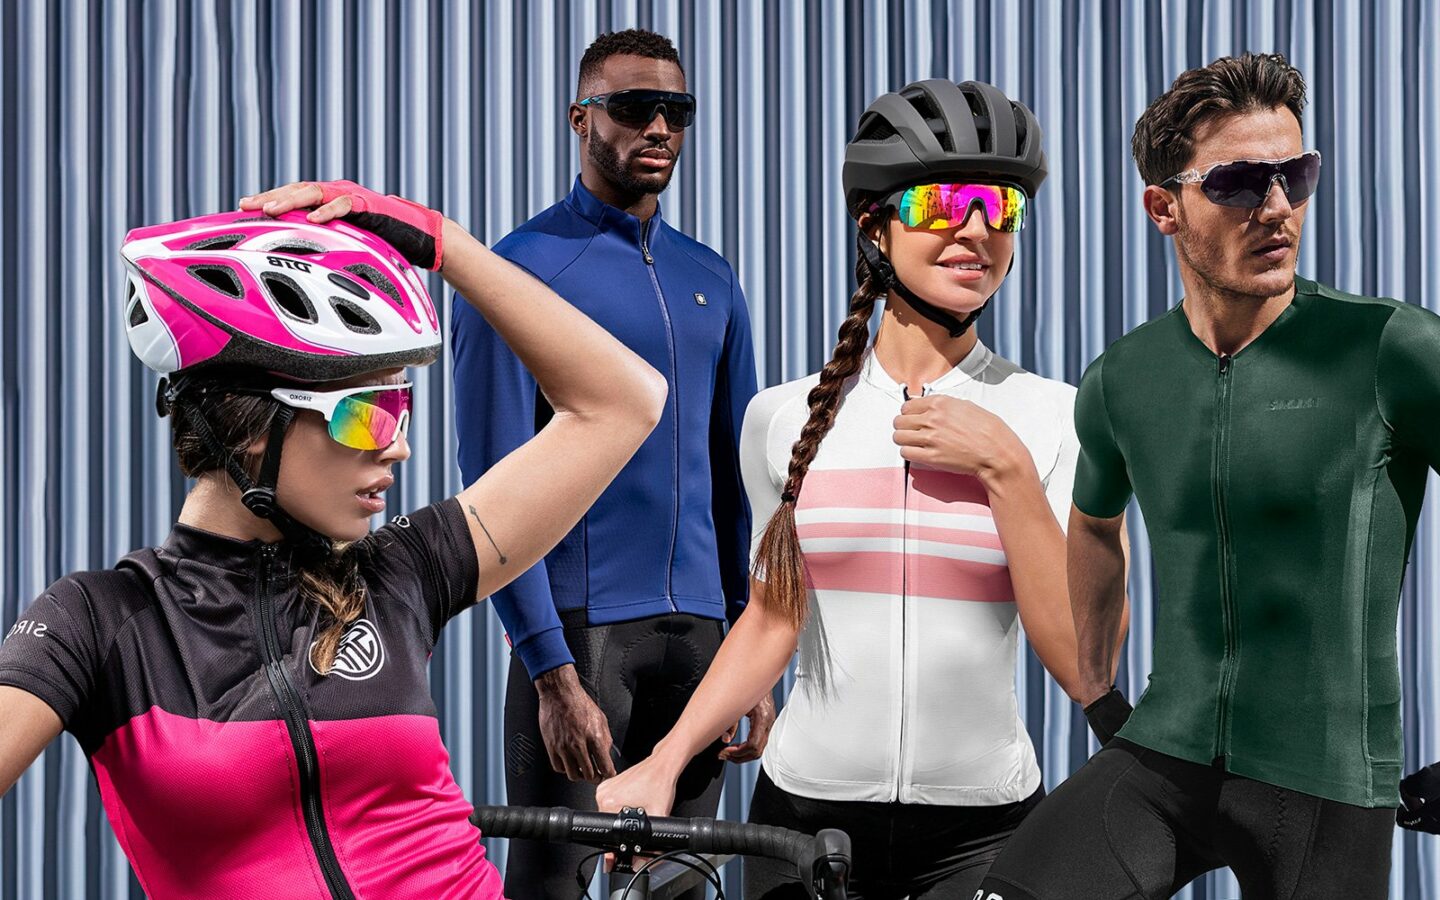 Cycling Sunglasses Sports Men Glasses Road Bicycle Glasses Mountain Bike Riding Protection Goggles Eyewear Women Sun Glasses